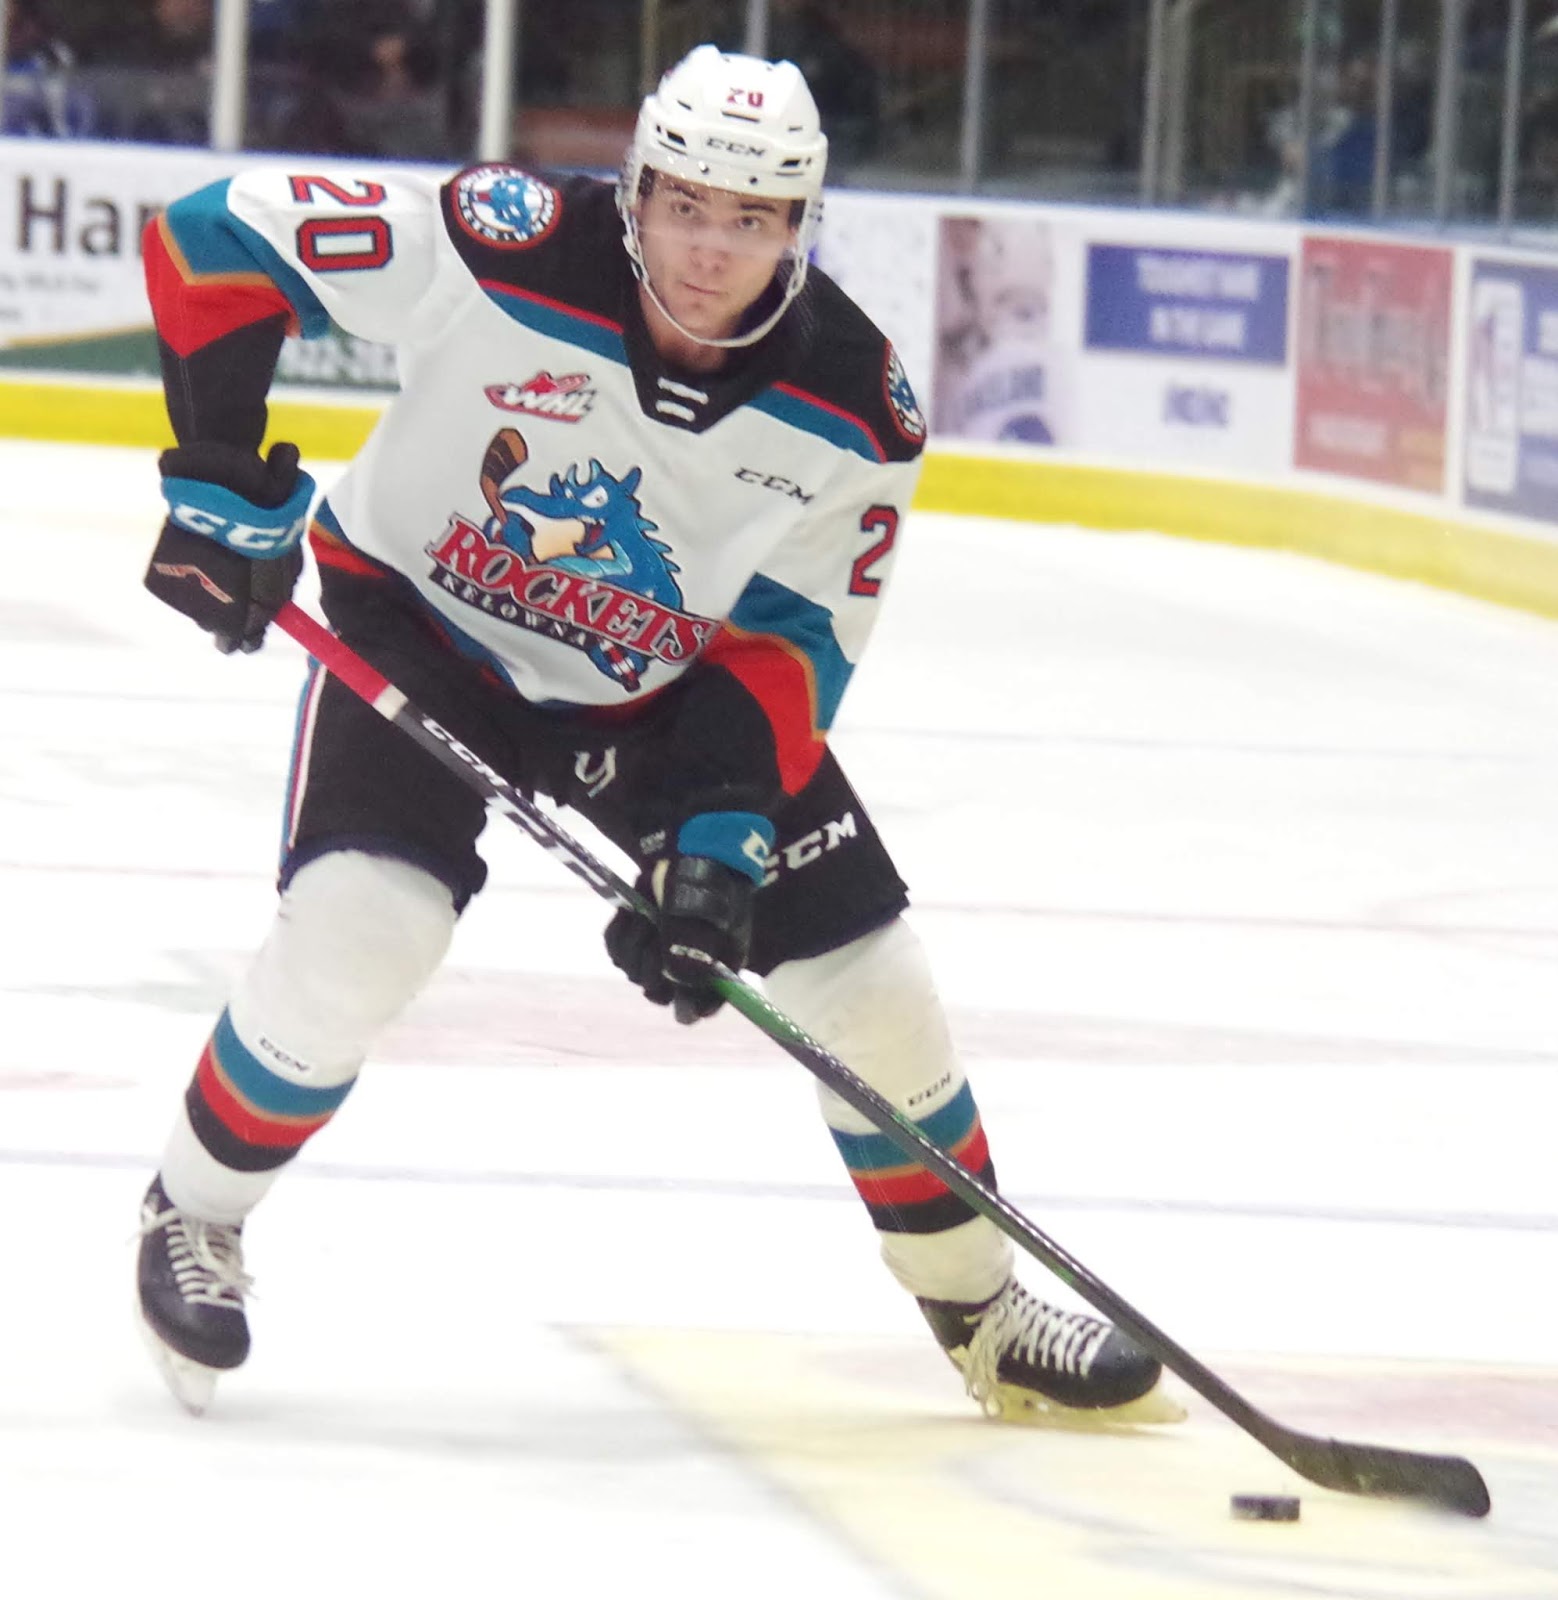 Stadel, Stephens with the Rockets at Memorial Cup - Surrey Now-Leader